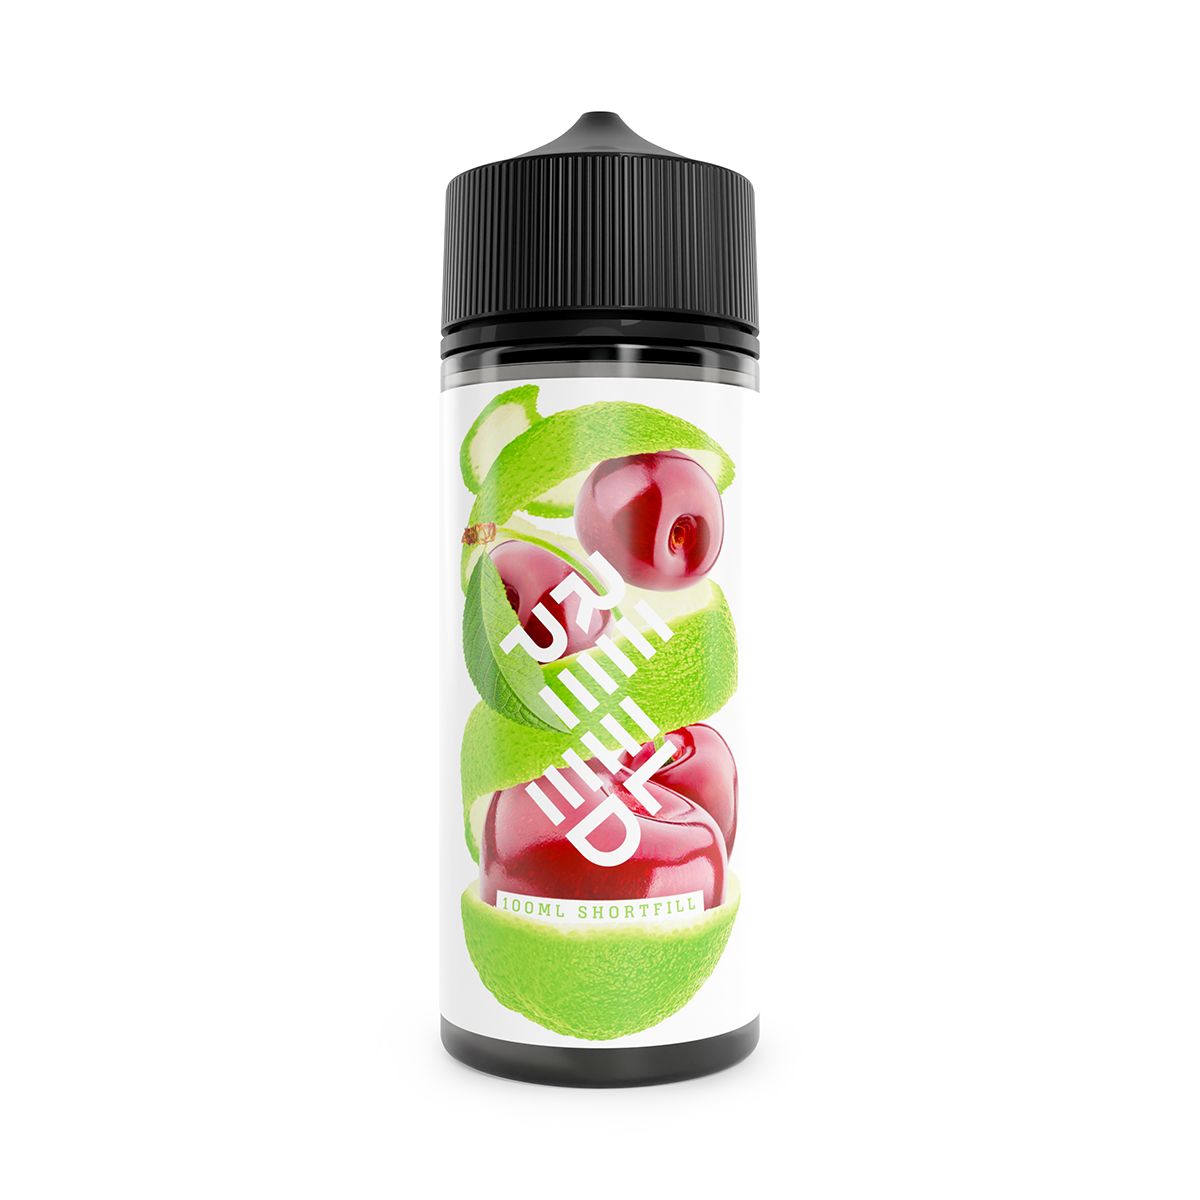 Lime & Cherry Shortfill by Repeeled. - 100ml-Supergood.